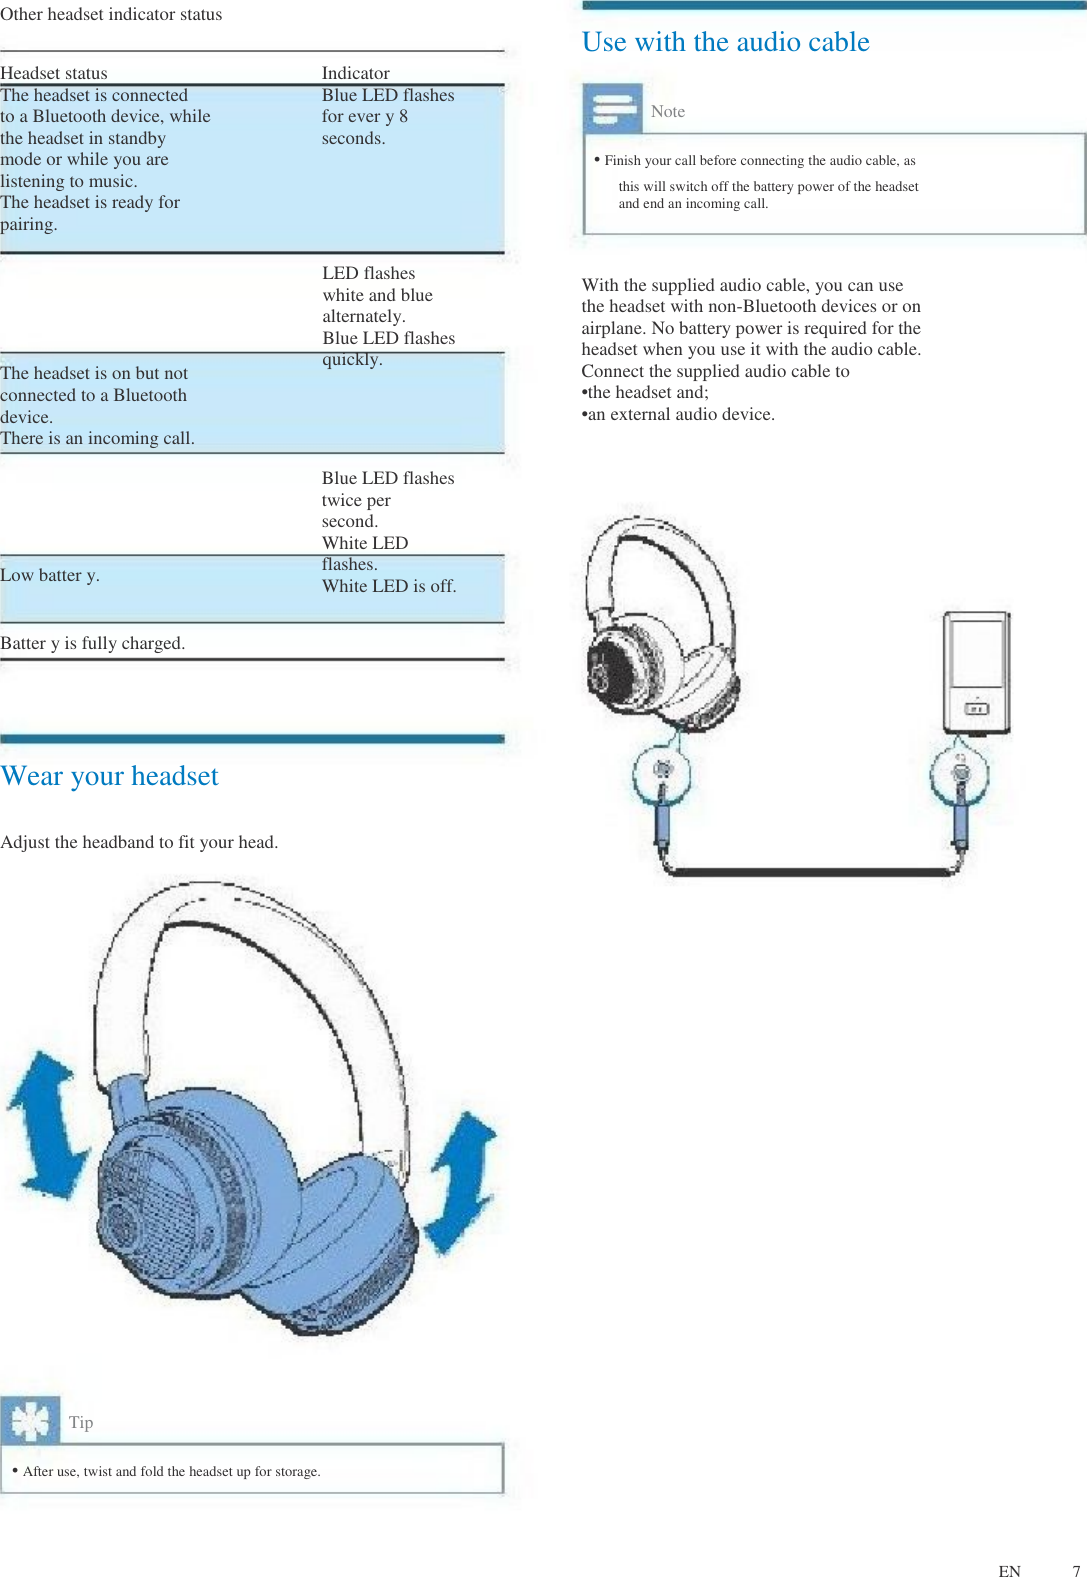 Other headset indicator status Use with the audio cable Headset status The headset is connected to a Bluetooth device, while the headset in standby mode or while you are listening to music. The headset is ready for pairing. Indicator Blue LED flashes for ever y 8 seconds. Note • Finish your call before connecting the audio cable, as this will switch off the battery power of the headset and end an incoming call. The headset is on but not connected to a Bluetooth device. There is an incoming call. LED flashes white and blue alternately. Blue LED flashes quickly. With the supplied audio cable, you can use the headset with non-Bluetooth devices or on airplane. No battery power is required for the headset when you use it with the audio cable. Connect the supplied audio cable to •the headset and; •an external audio device. Low batter y. Batter y is fully charged. Blue LED flashes twice per second. White LED flashes. White LED is off. Wear your headset Adjust the headband to fit your head. Tip • After use, twist and fold the headset up for storage. EN 7 